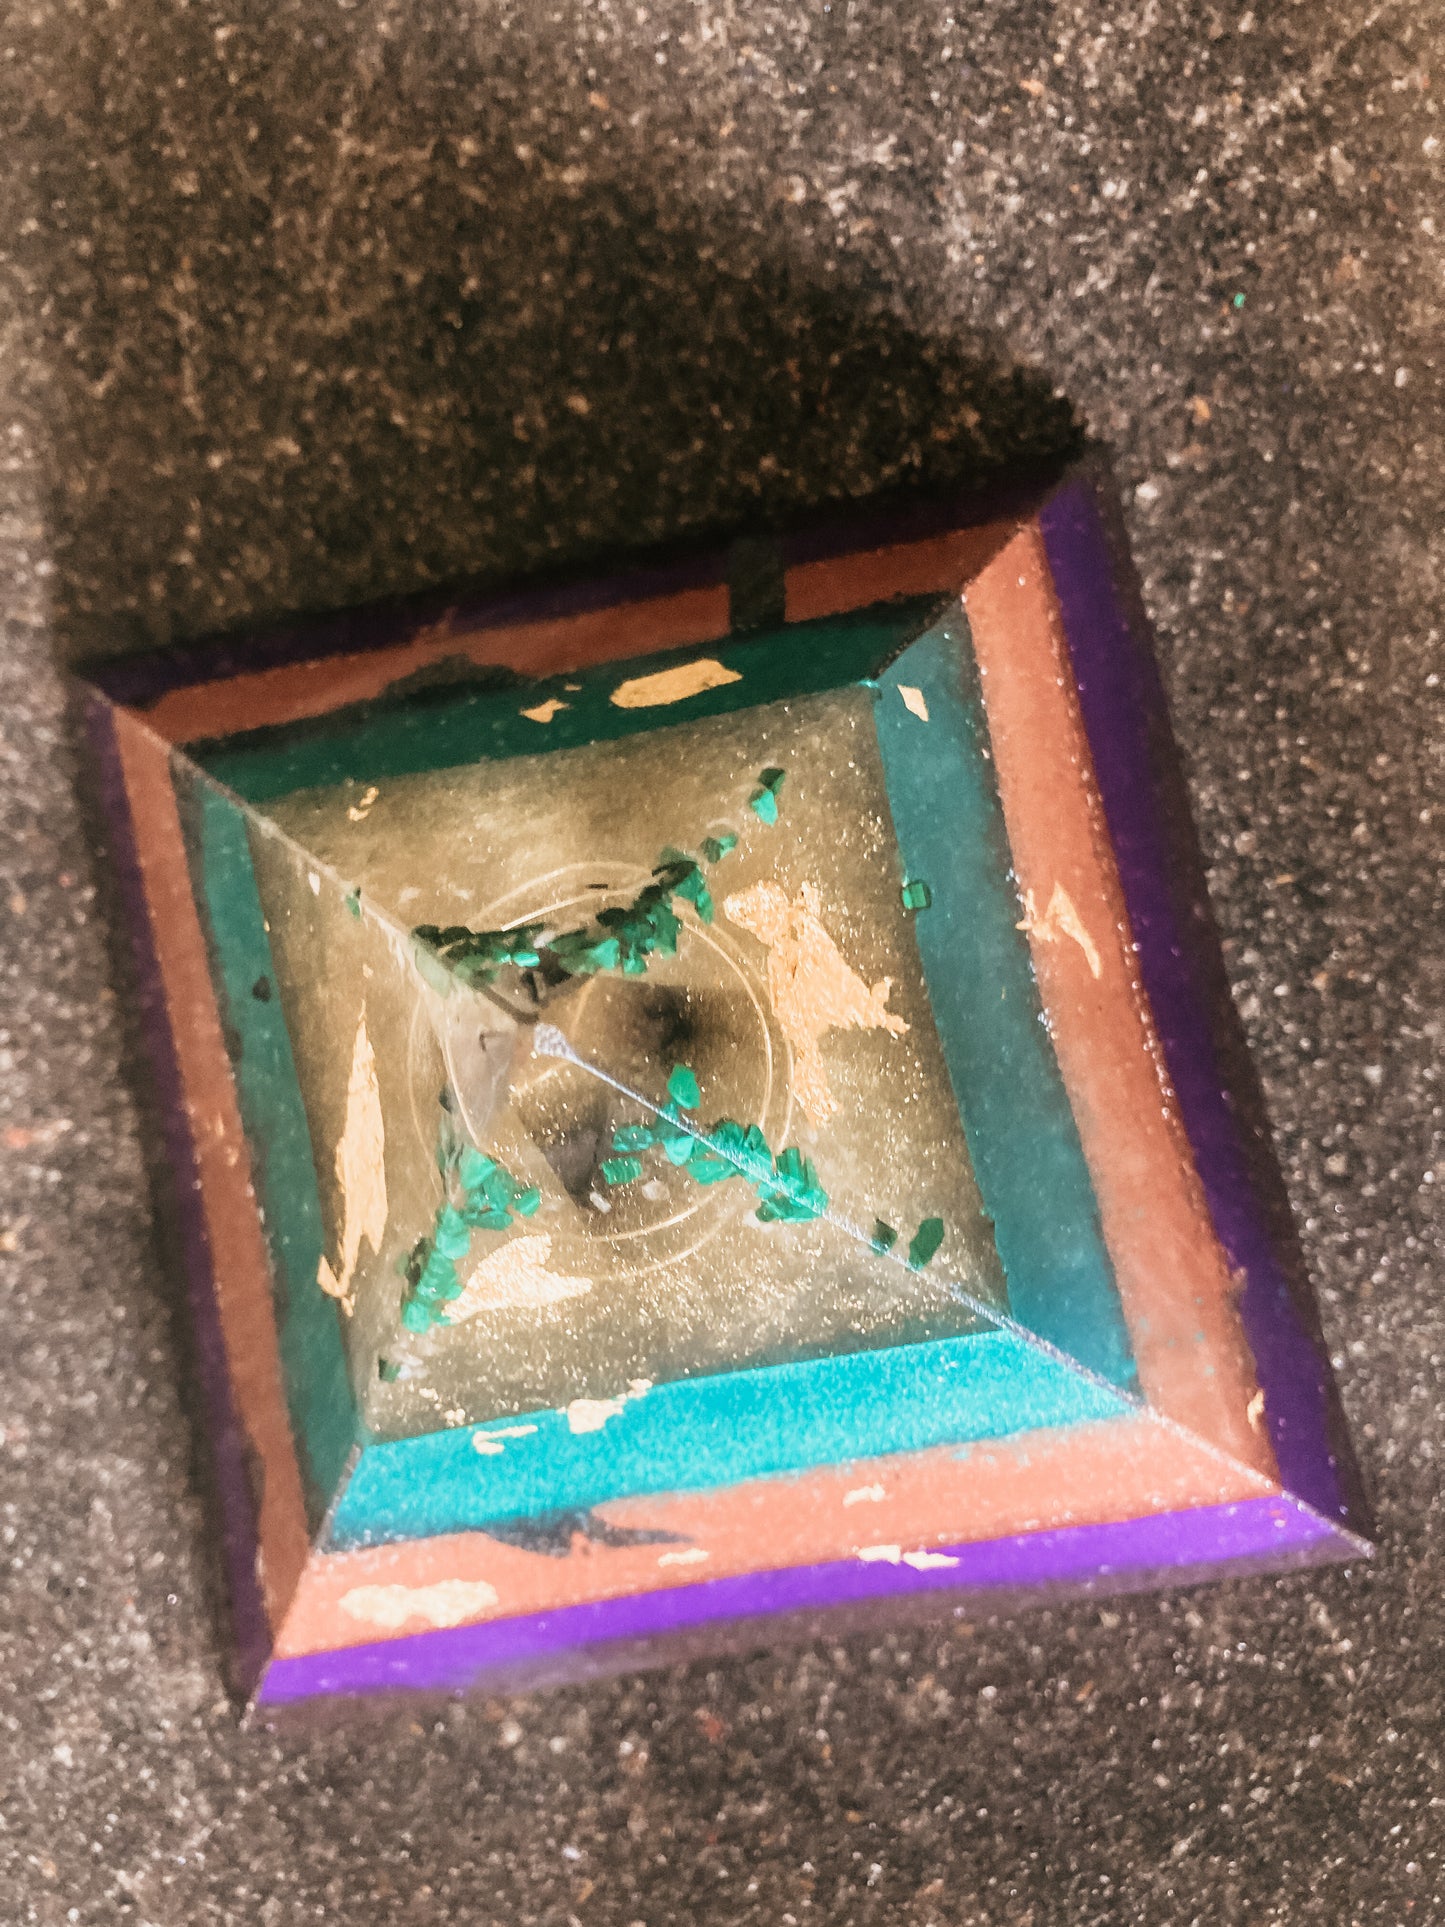 8-Sided Orgonite Cheops Pyramid